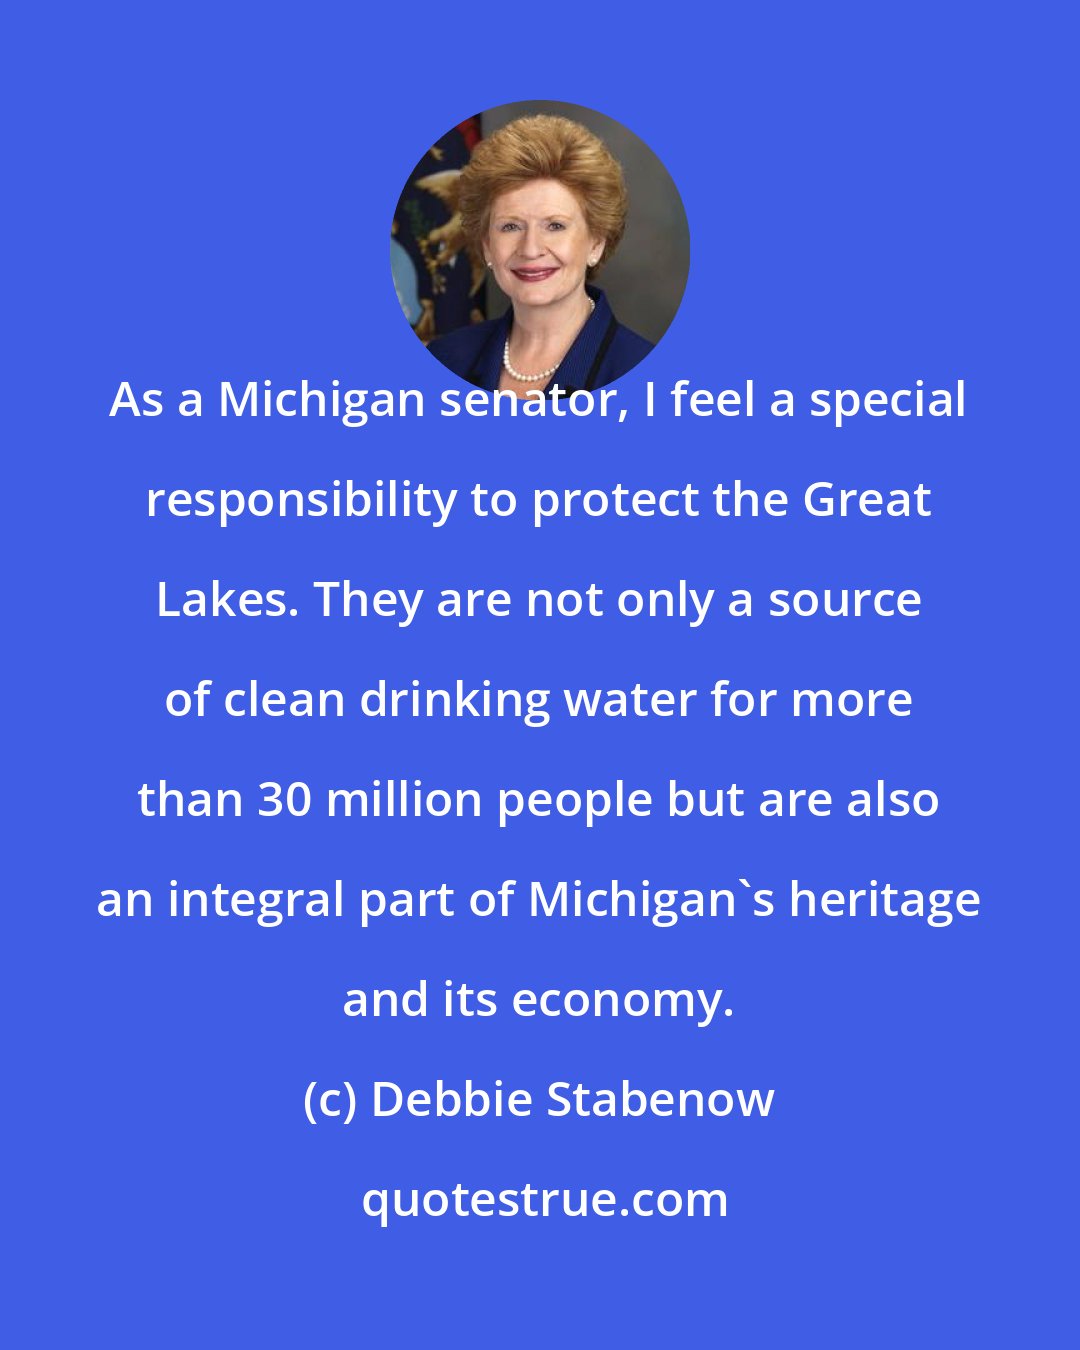 Debbie Stabenow: As a Michigan senator, I feel a special responsibility to protect the Great Lakes. They are not only a source of clean drinking water for more than 30 million people but are also an integral part of Michigan's heritage and its economy.